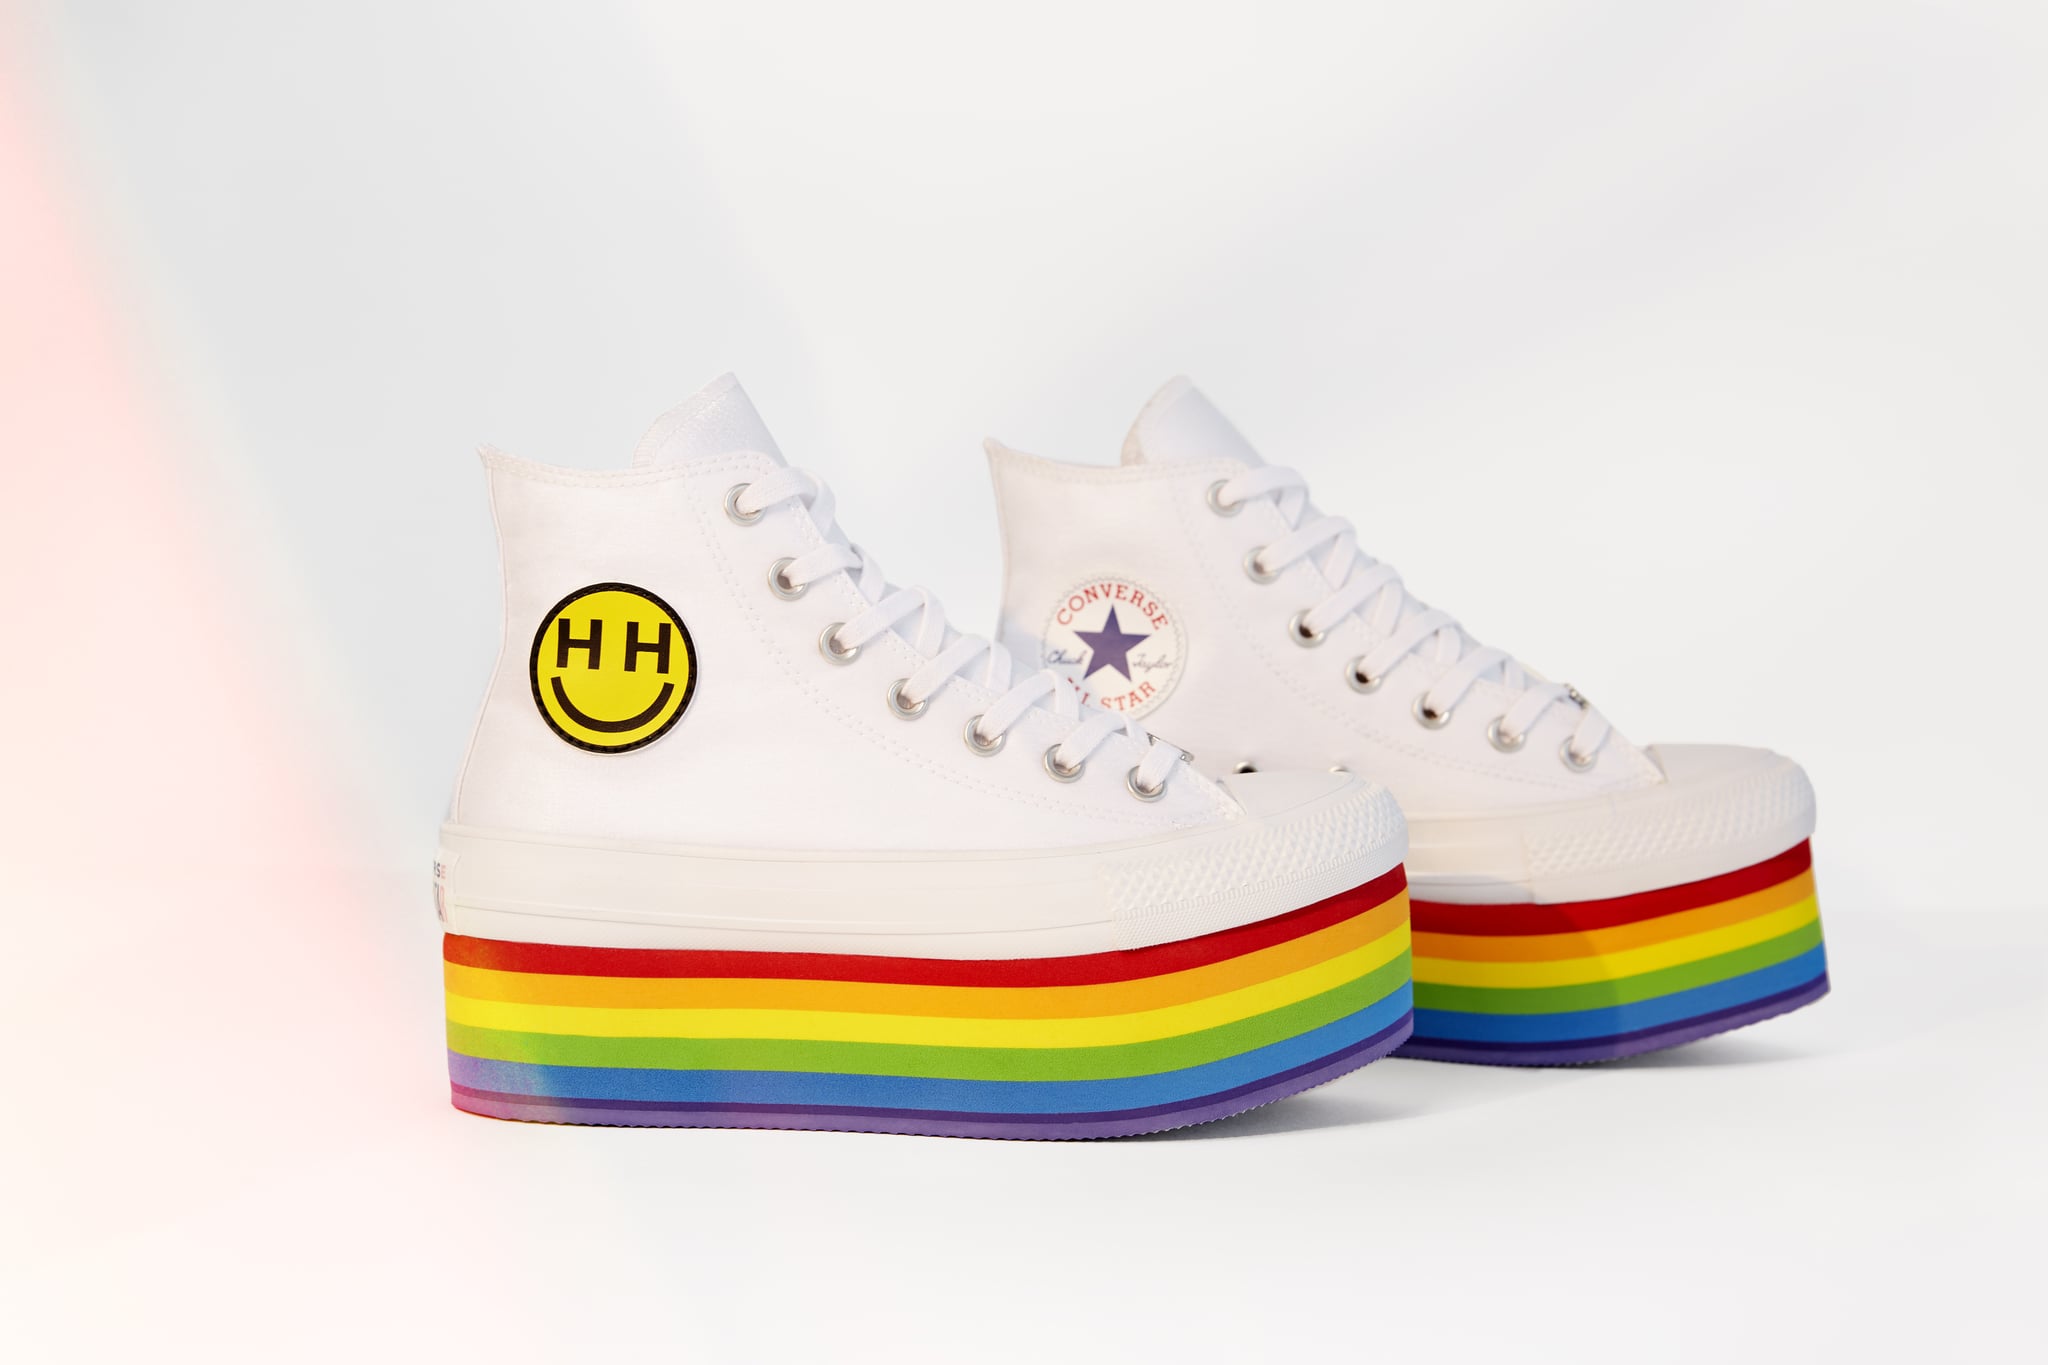 Wasserette zwanger Bacteriën Converse Pride X Miley Cyrus Chuck Taylor All Star Platform High Top | Miley  Cyrus's Pride Collection With Converse Is Every Bit as Colorful as You  Think It'd Be | POPSUGAR Fashion